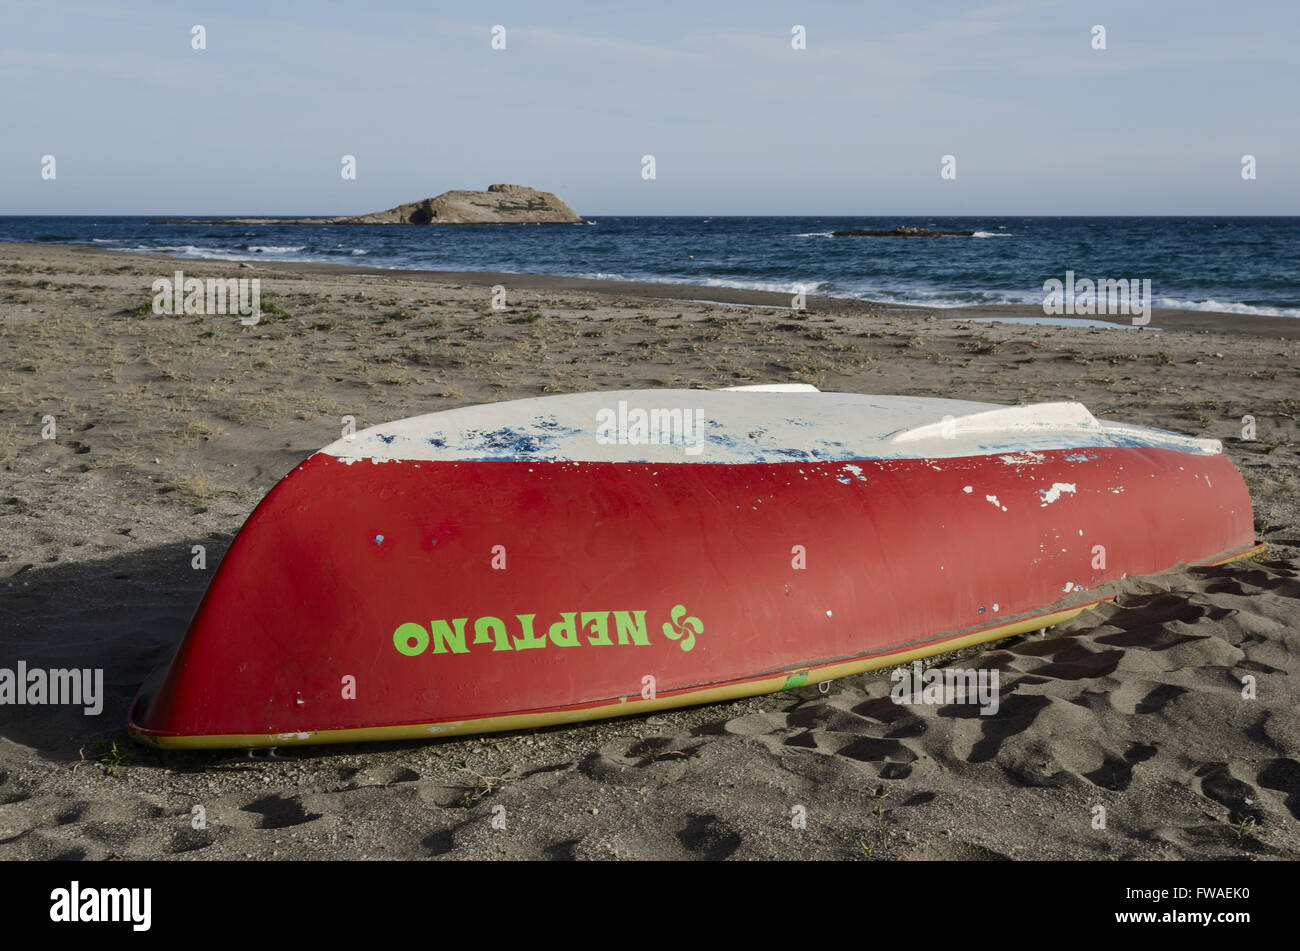 A red boat view on Carboneras beach, Almeria province, Spain Stock Photo